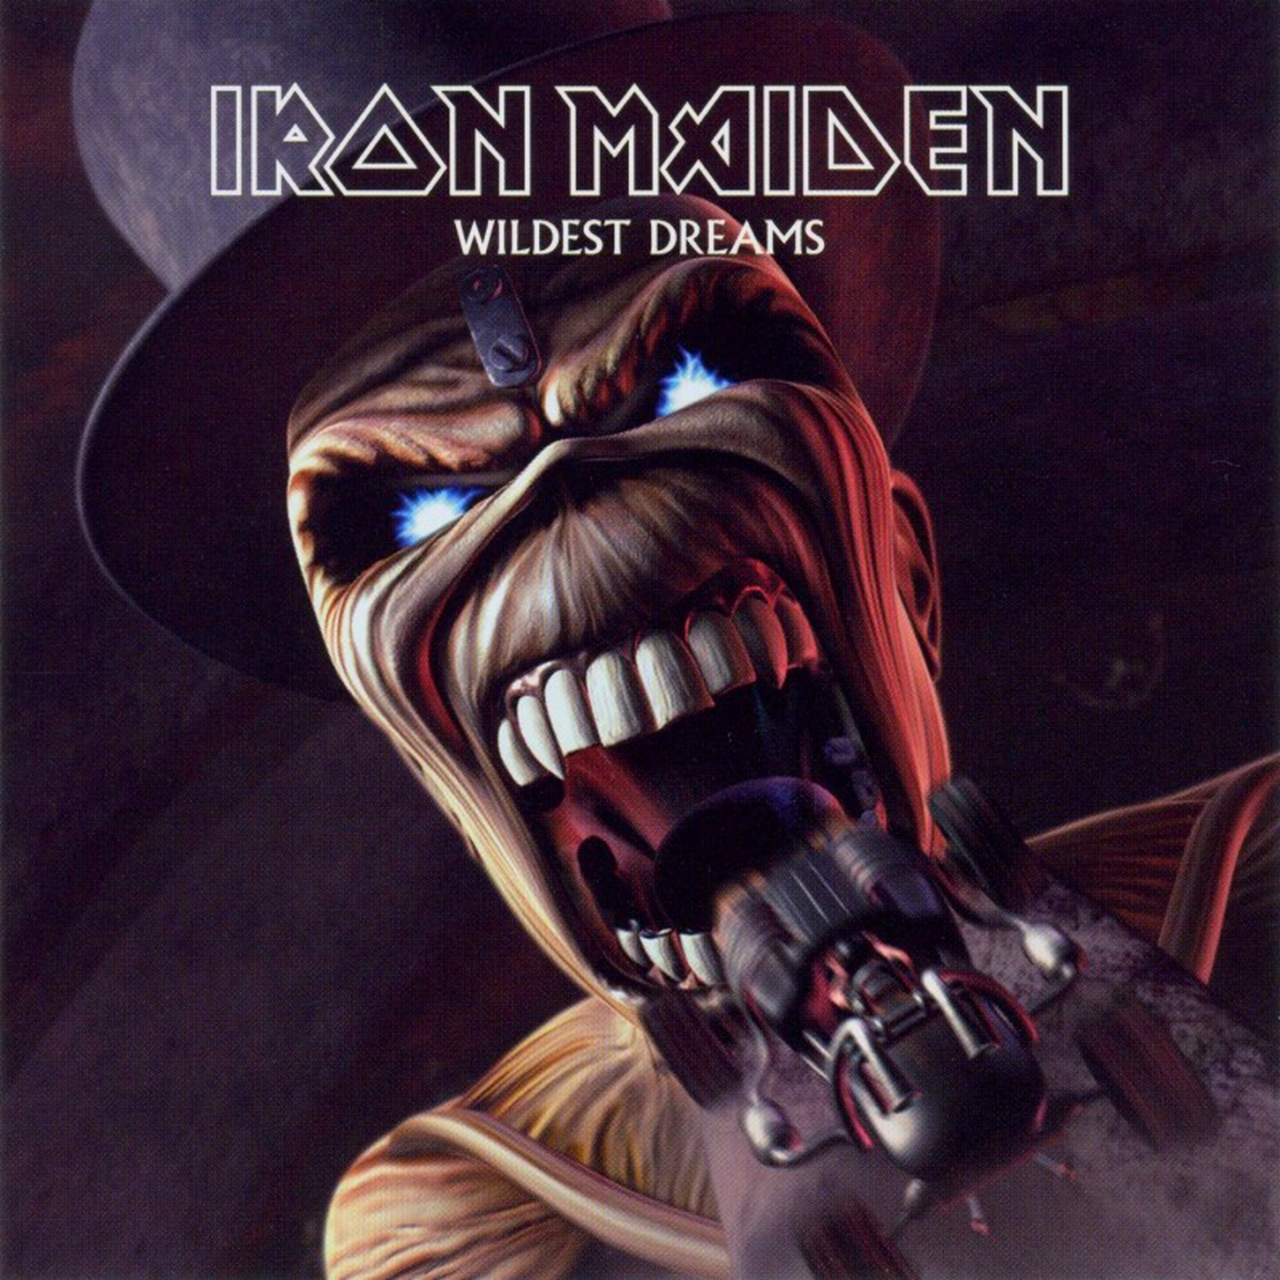 Singles discography maiden iron List of